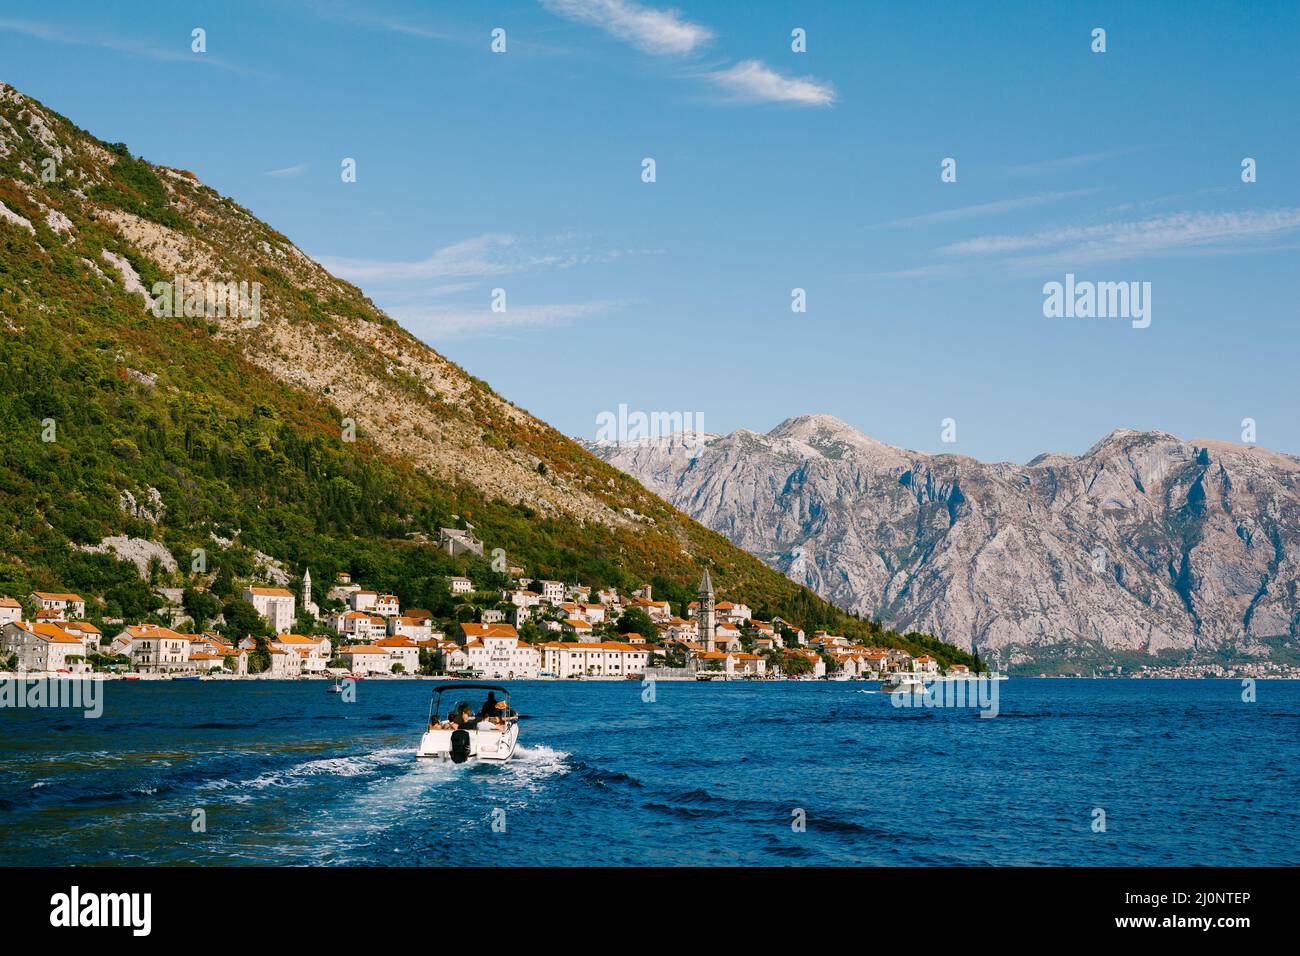 Motor boat sails to the coast of Perast. Montenegro. Back view Stock Photo